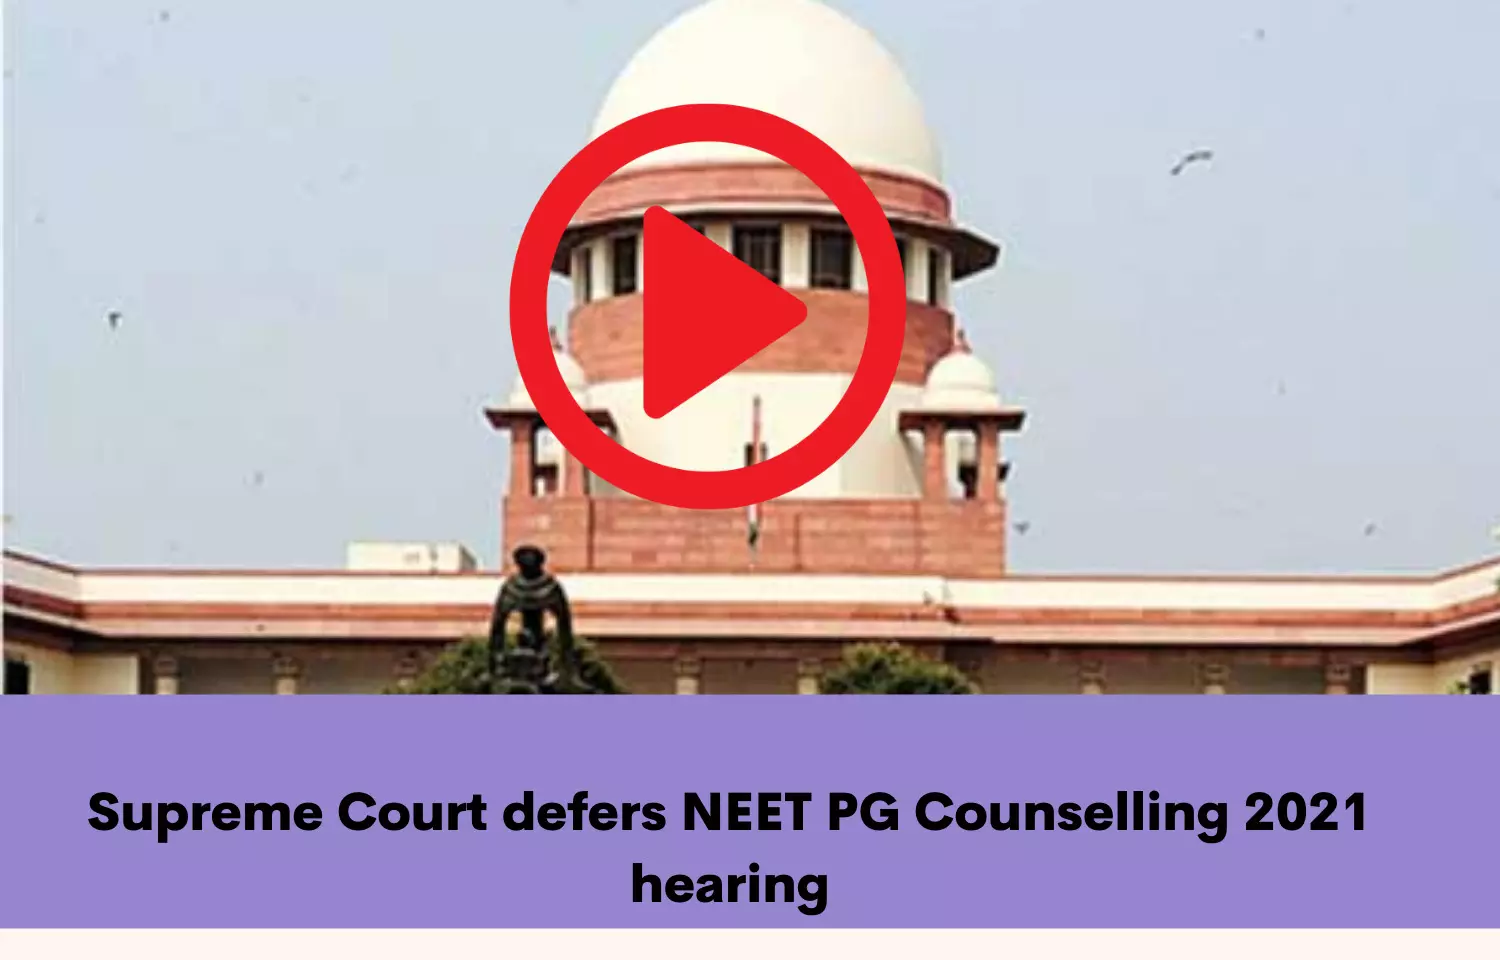 Supreme Court defers NEET PG Counselling 2021 hearing